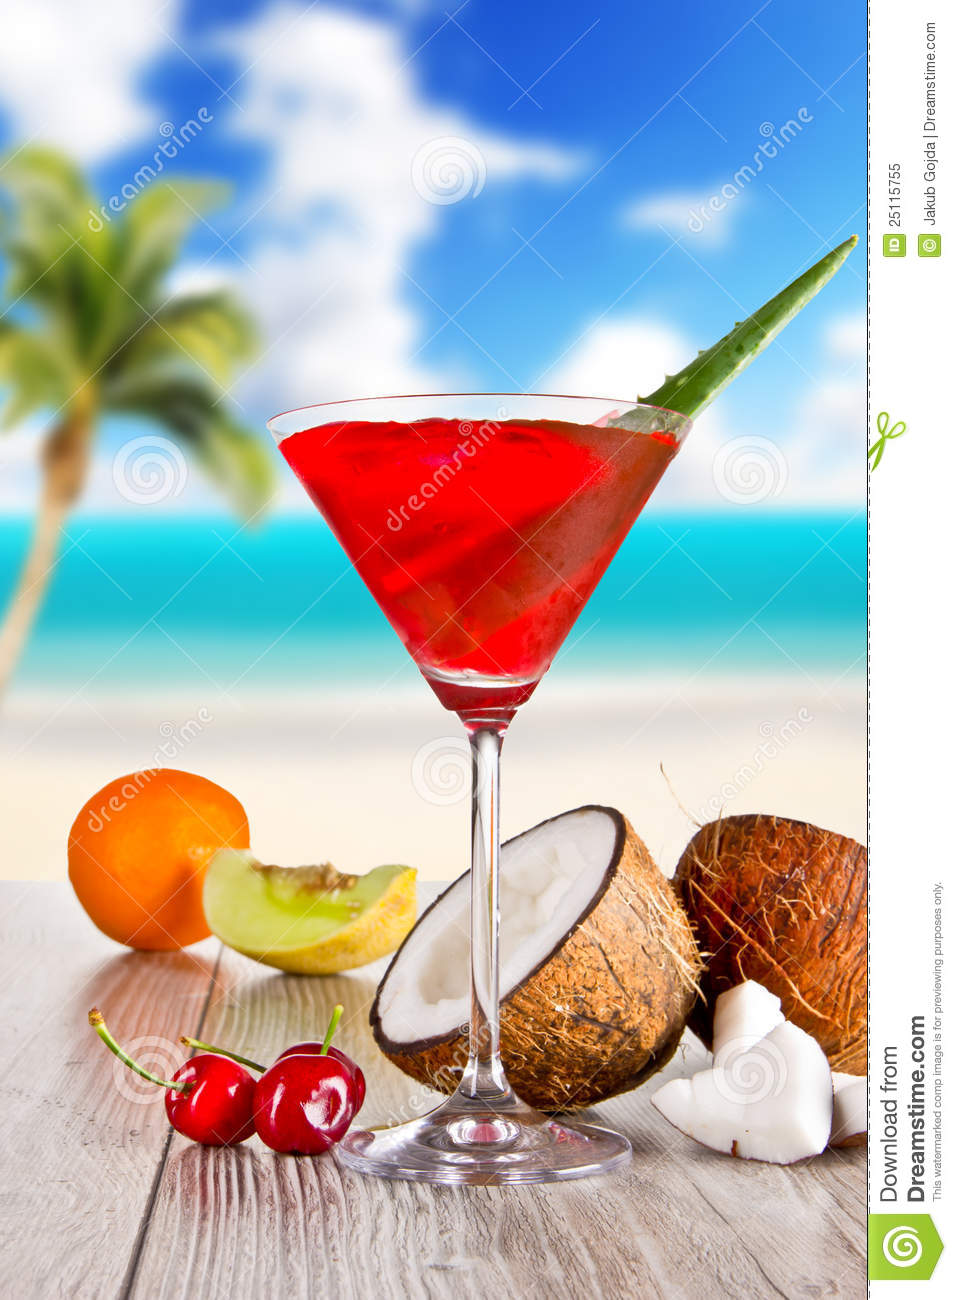 Summer Drink Royalty Free Stock Photo   Image  25115755